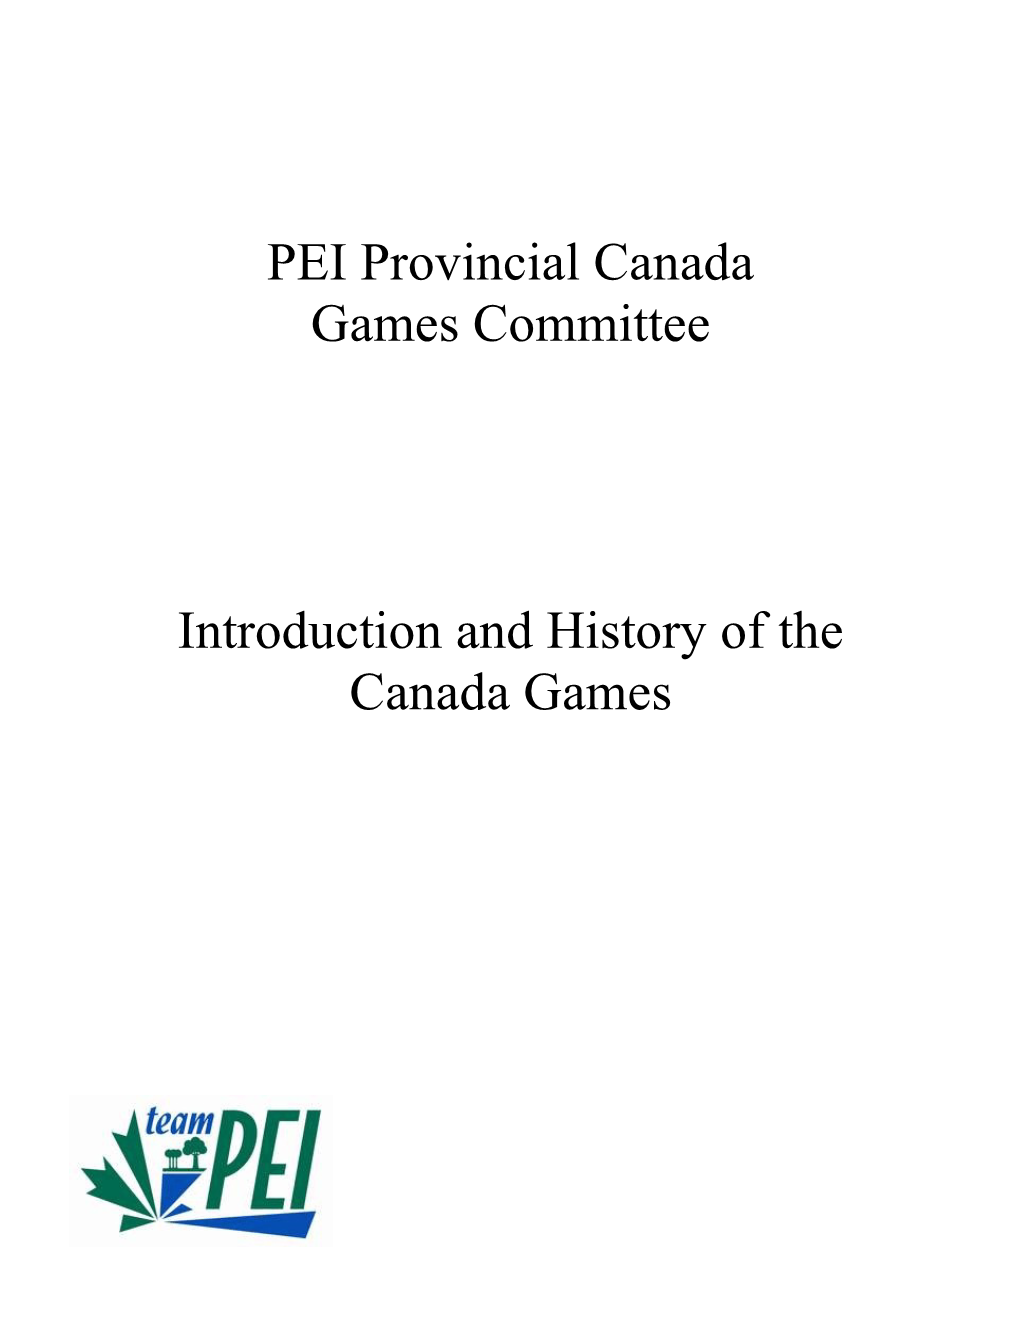 A Brief History of the Canada Games